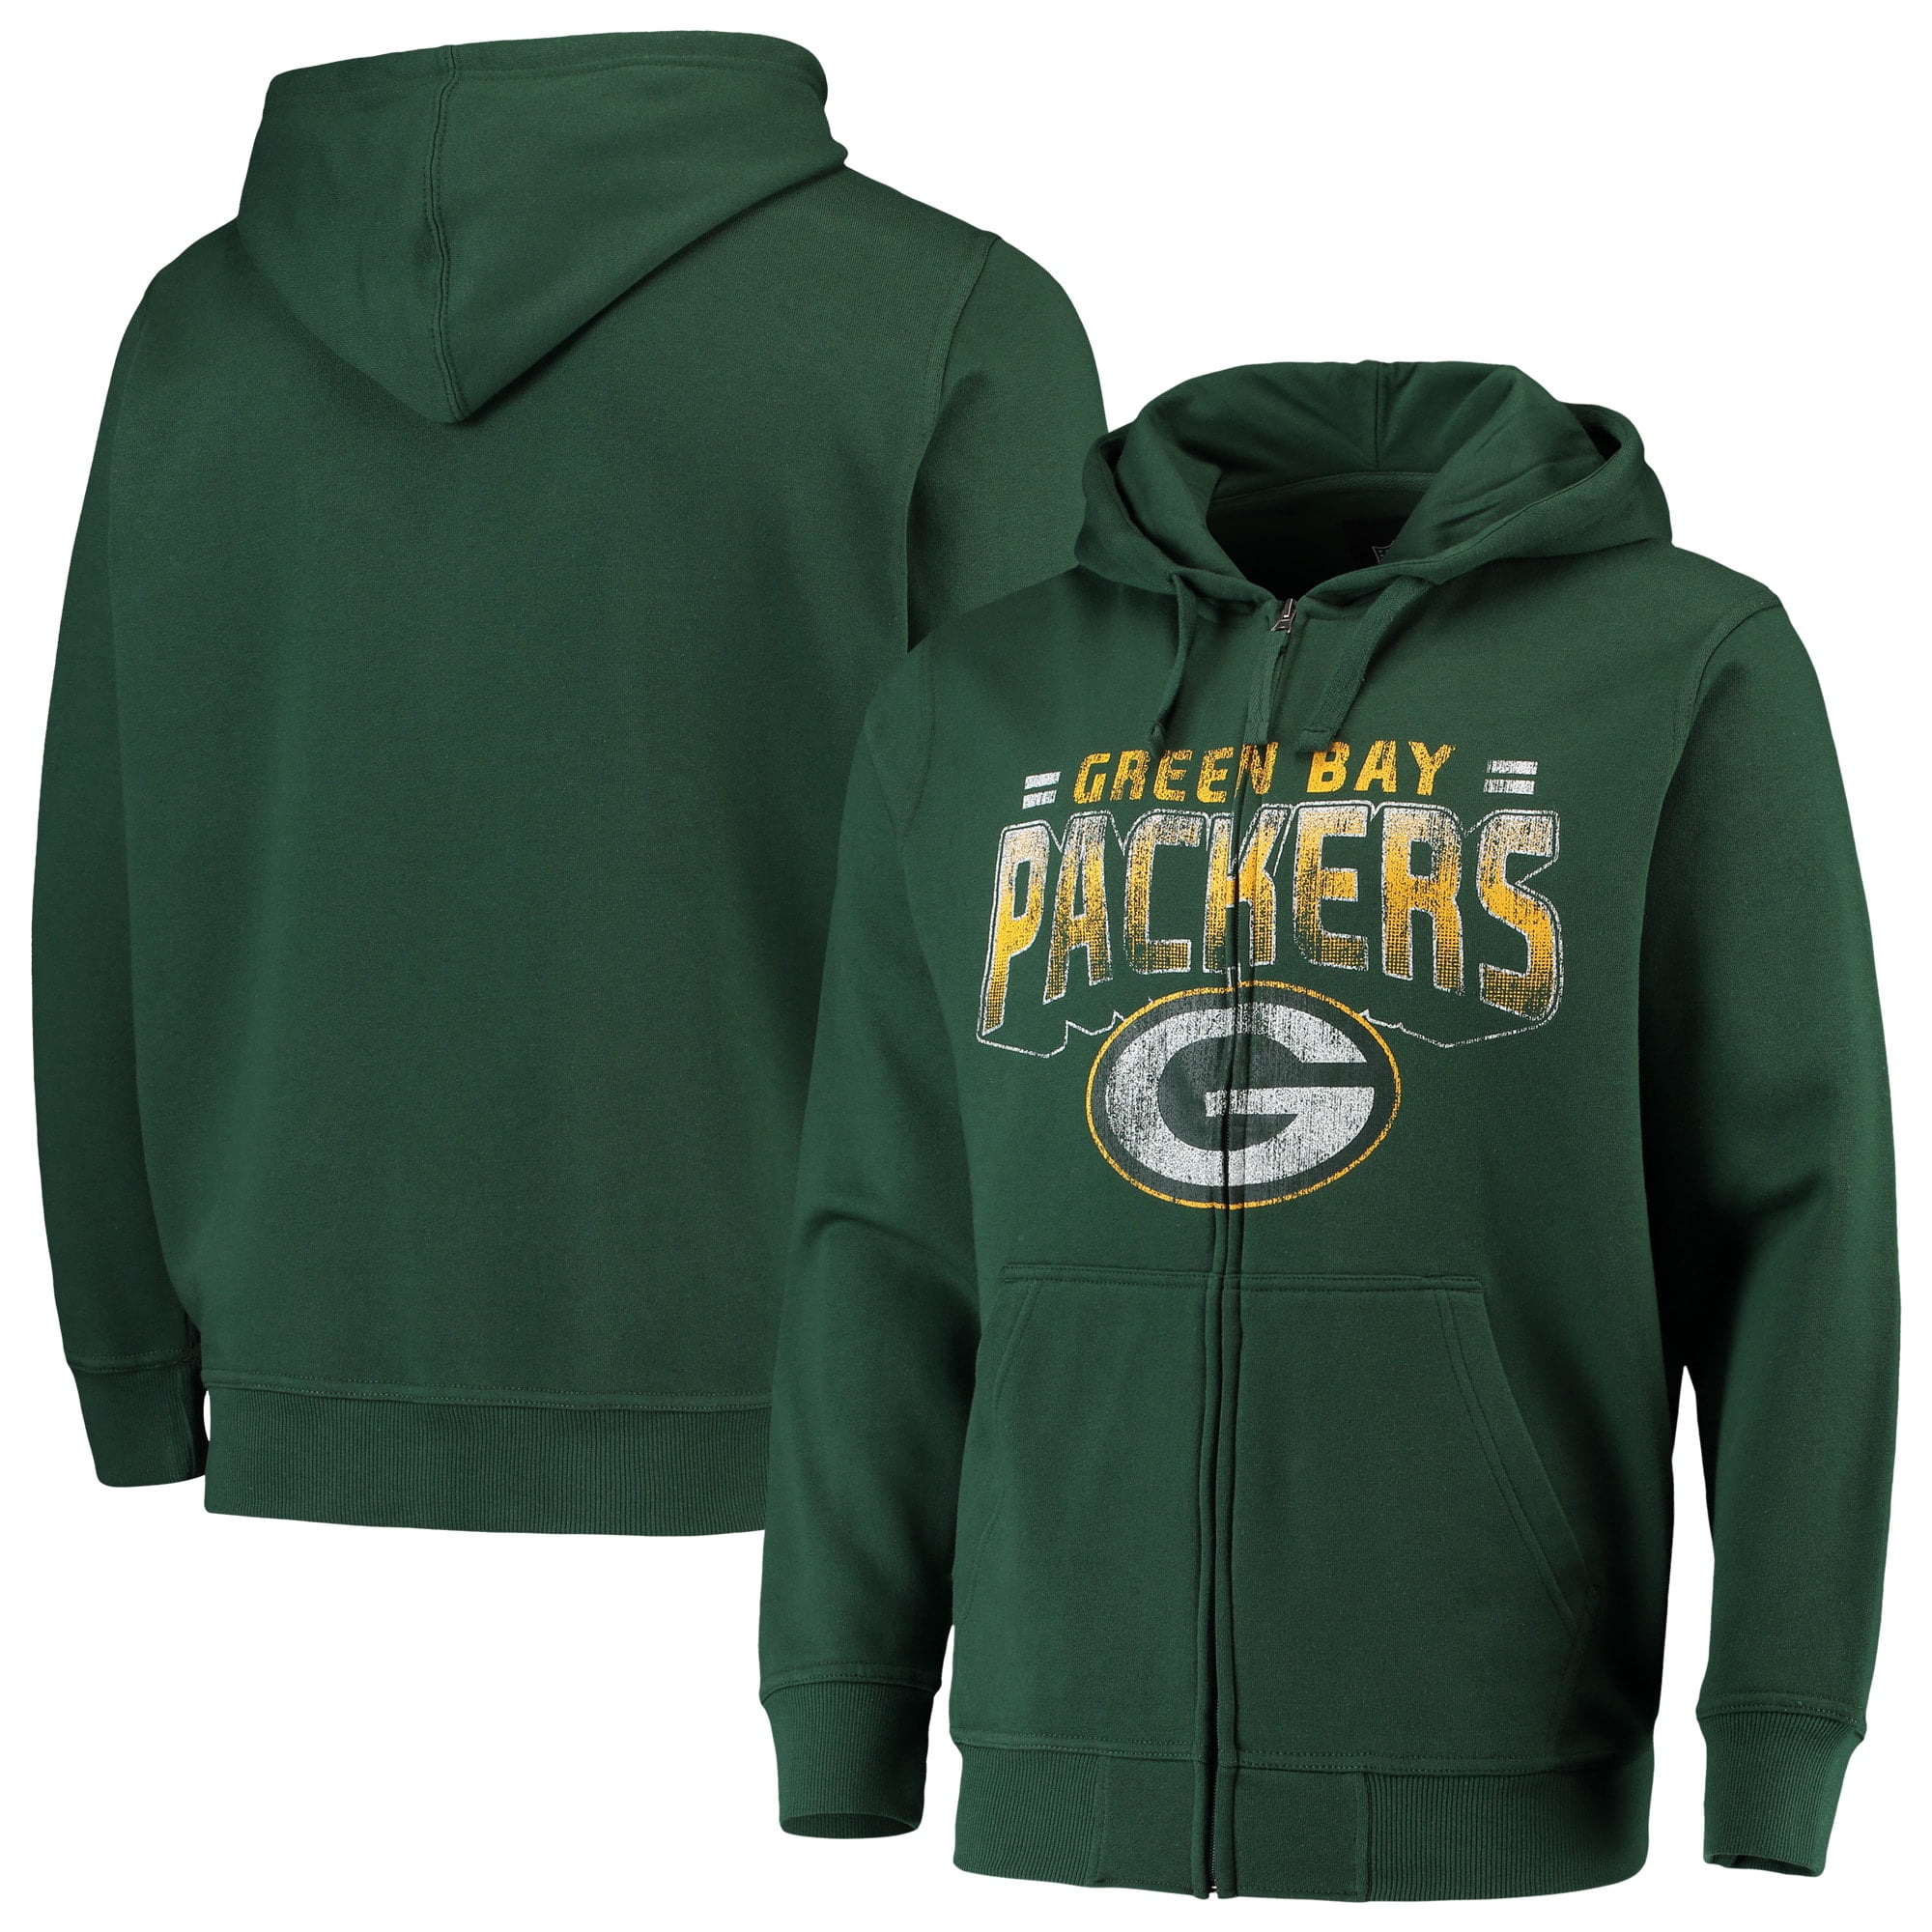 Sporty hoodie Green Bay Packers Jacket  Zip up Autumn Sweater Tops